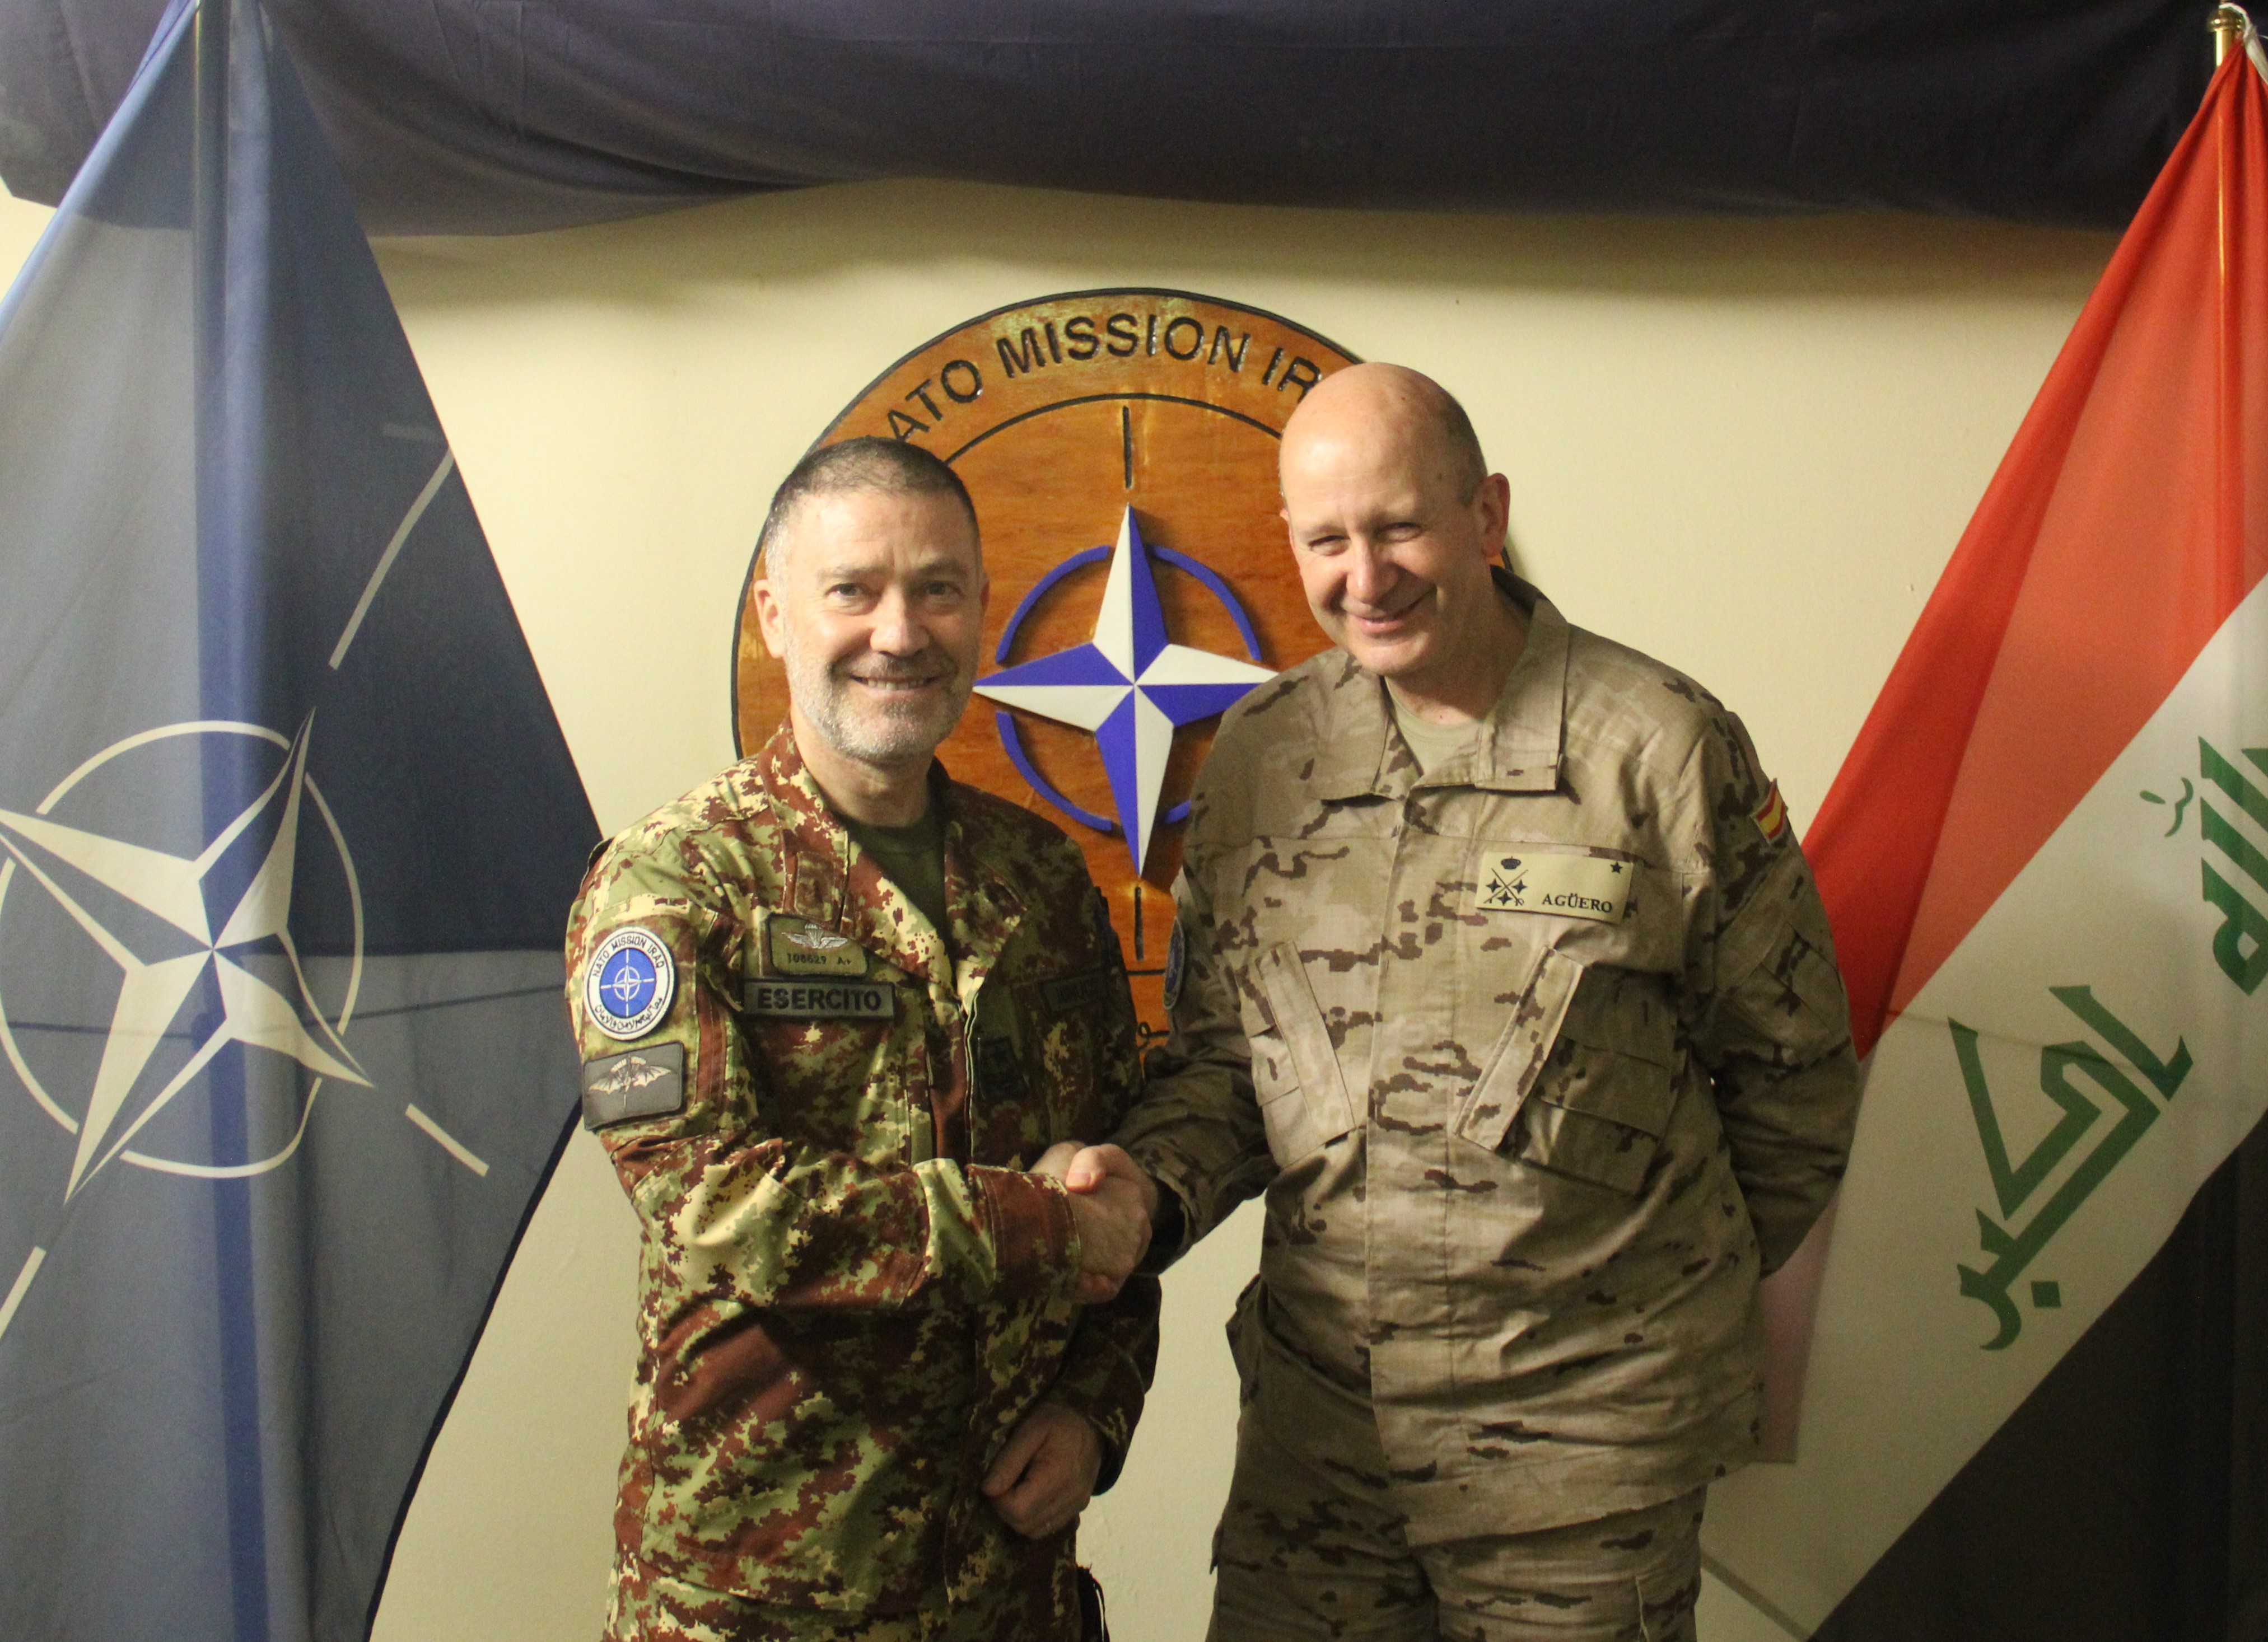 Meeting with the Head of NATO Mission IRAQ